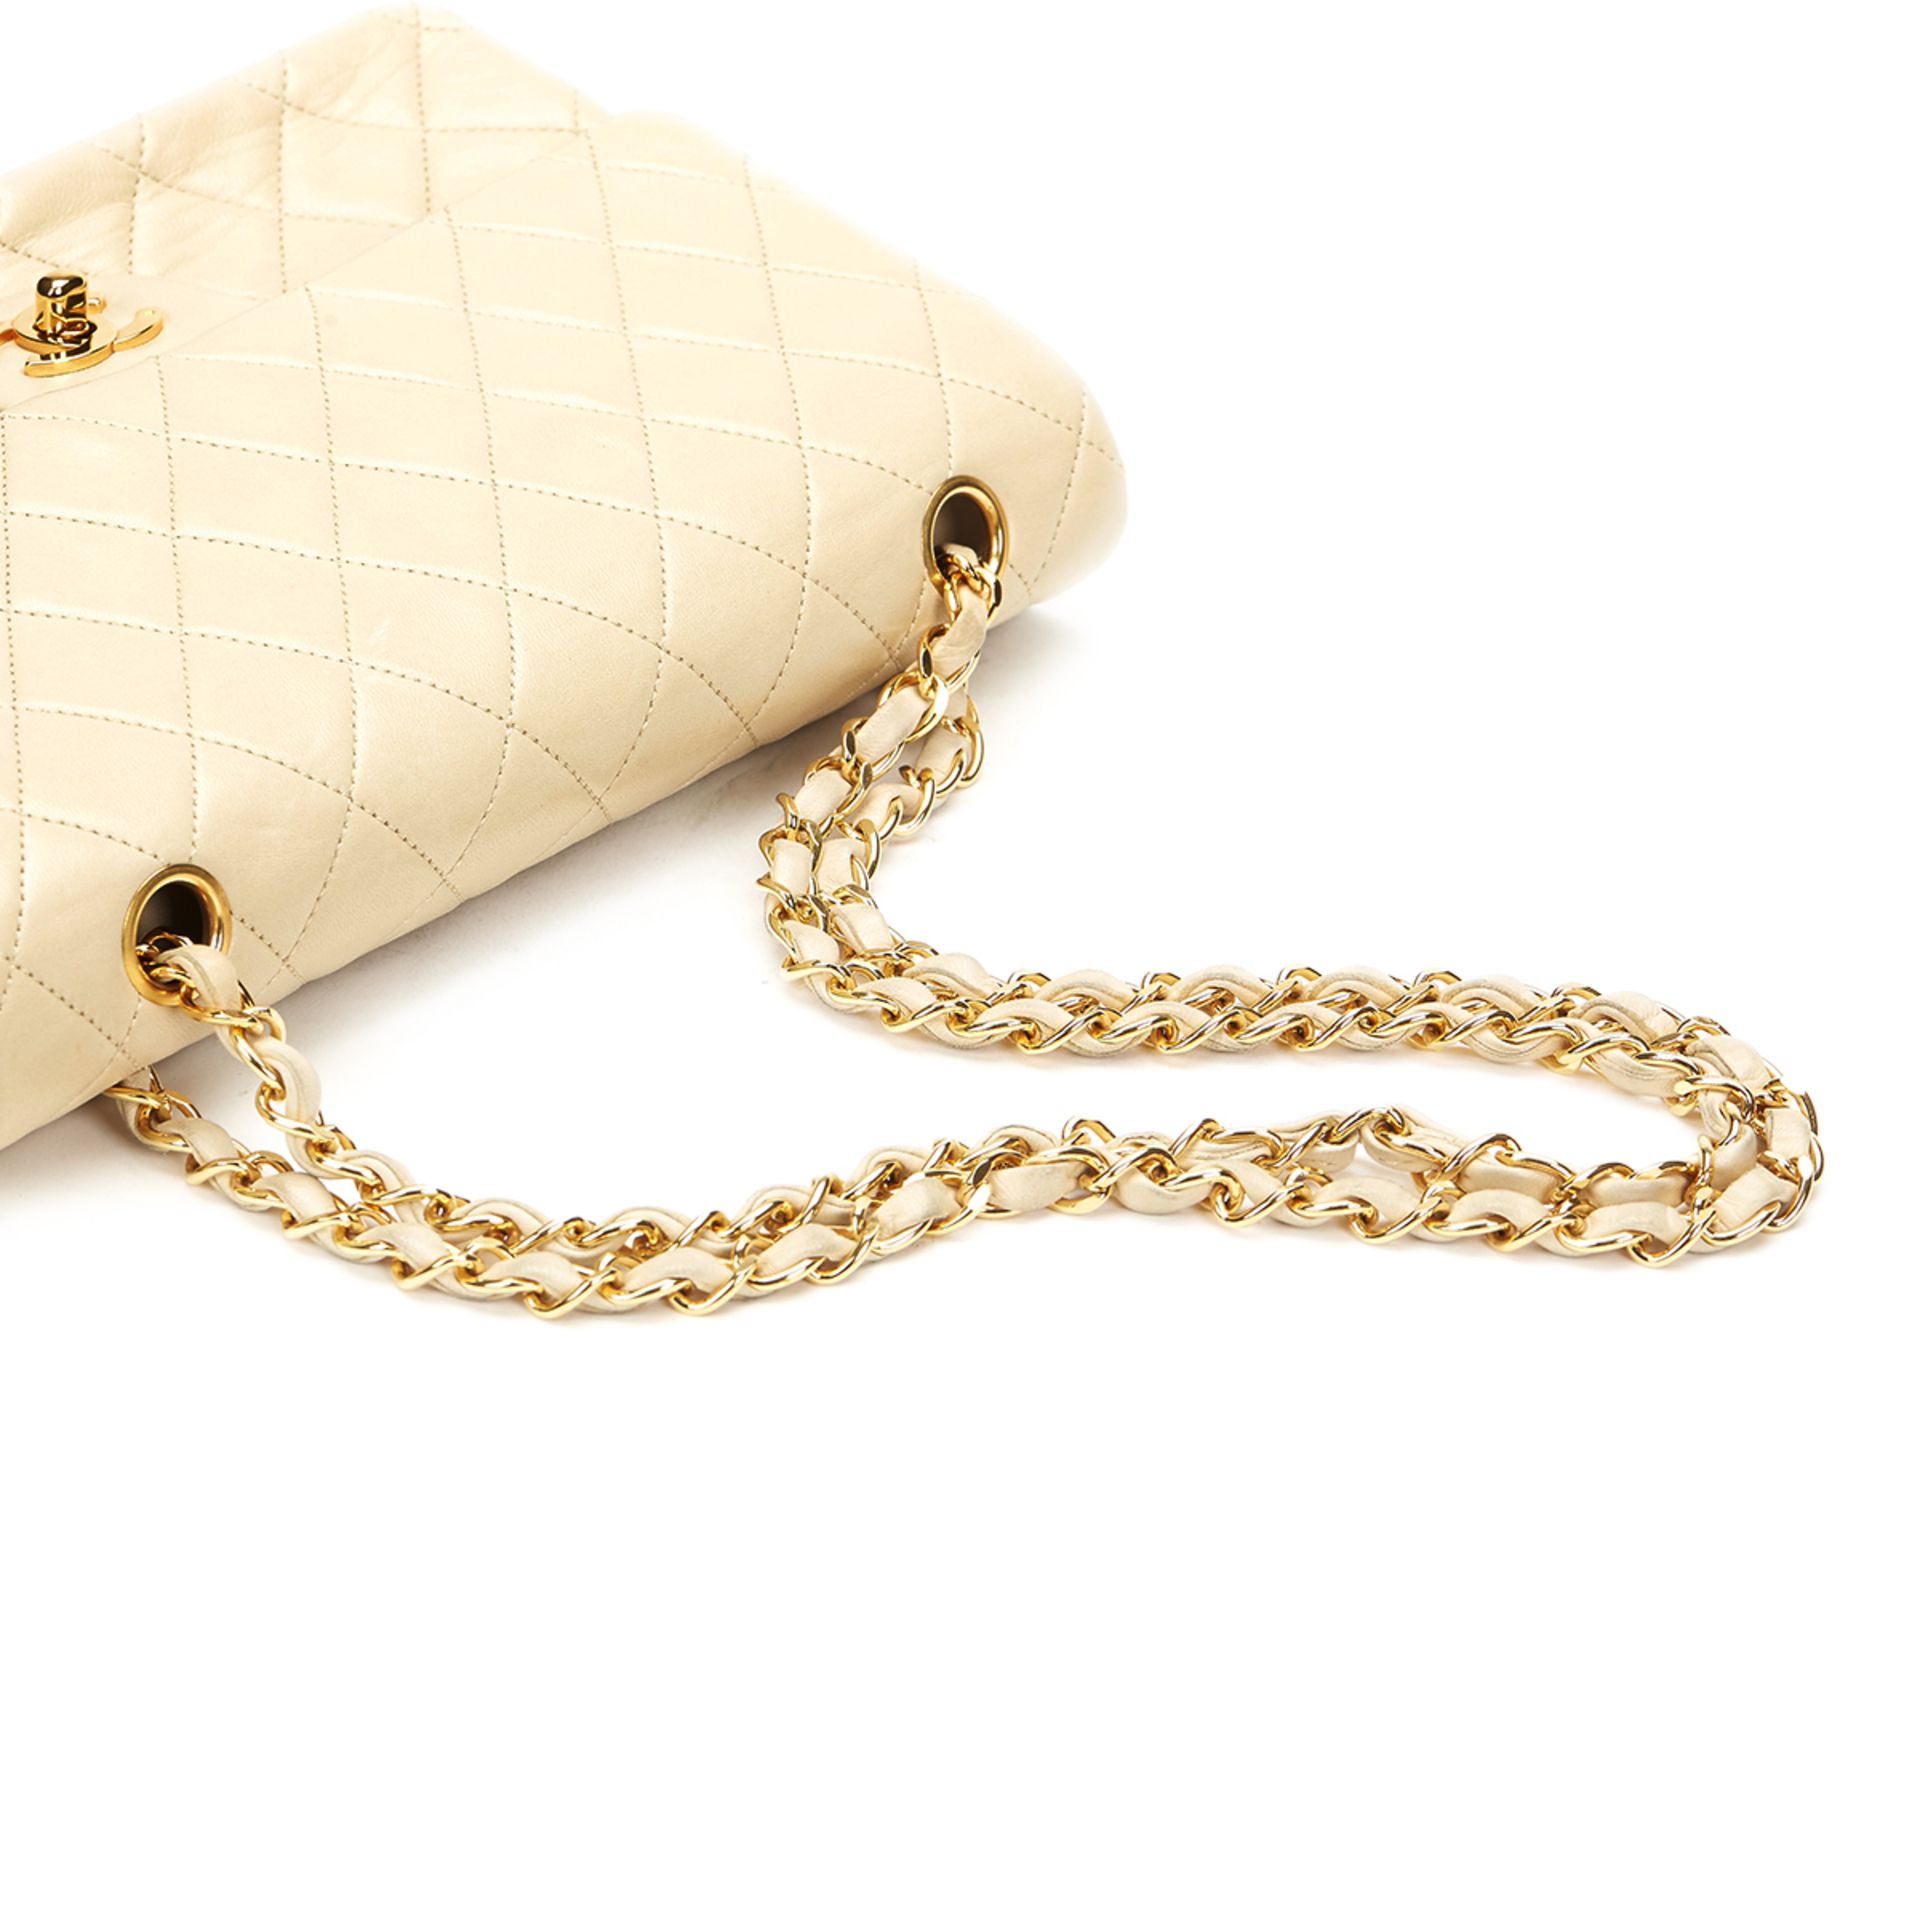 Ivory Quilted Lambskin Vintage Medium Classic Double Flap Bag - Image 6 of 12